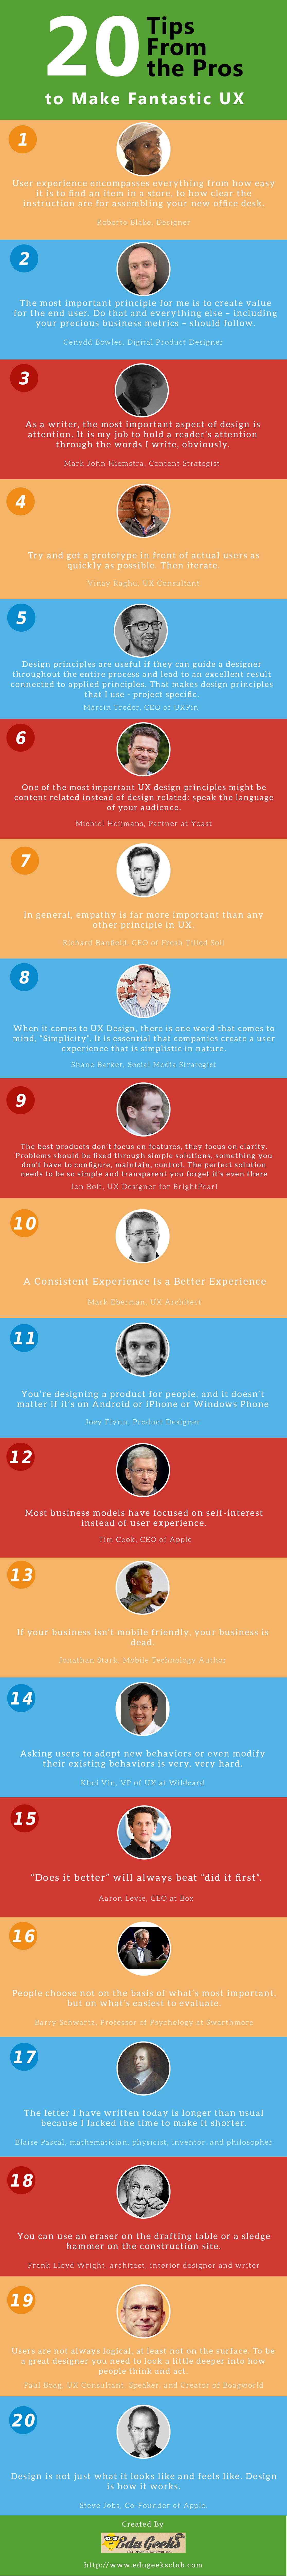 20-Tips-from-the-Pros-to-Make-Fantastic-User-Experience-Infographic-image